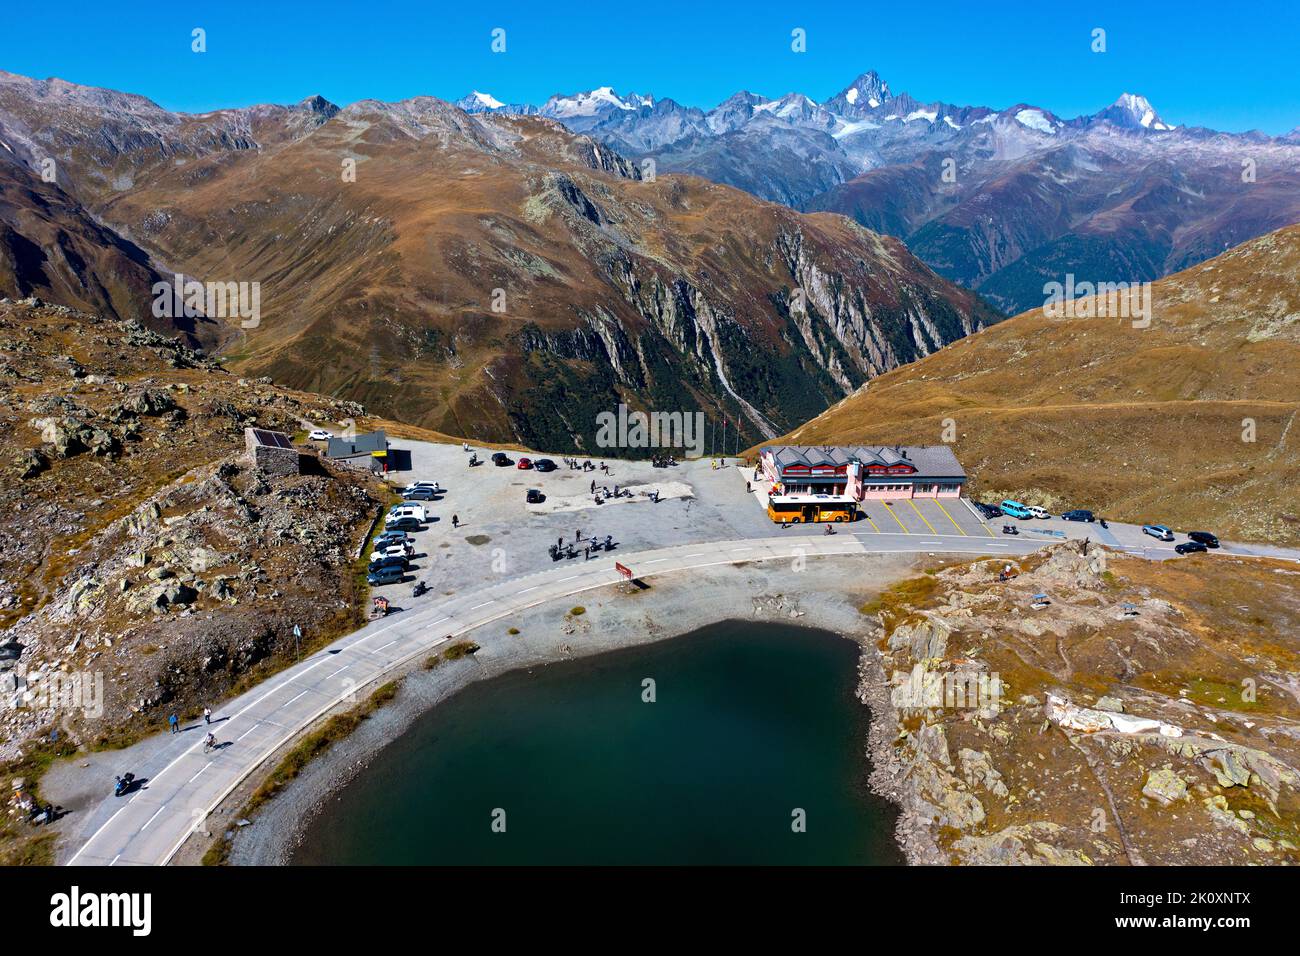 On the mountain pass Nufenenpass, in the background the chain of peaks of the Valais Alps, Goms, Valais, Switzerland Stock Photo